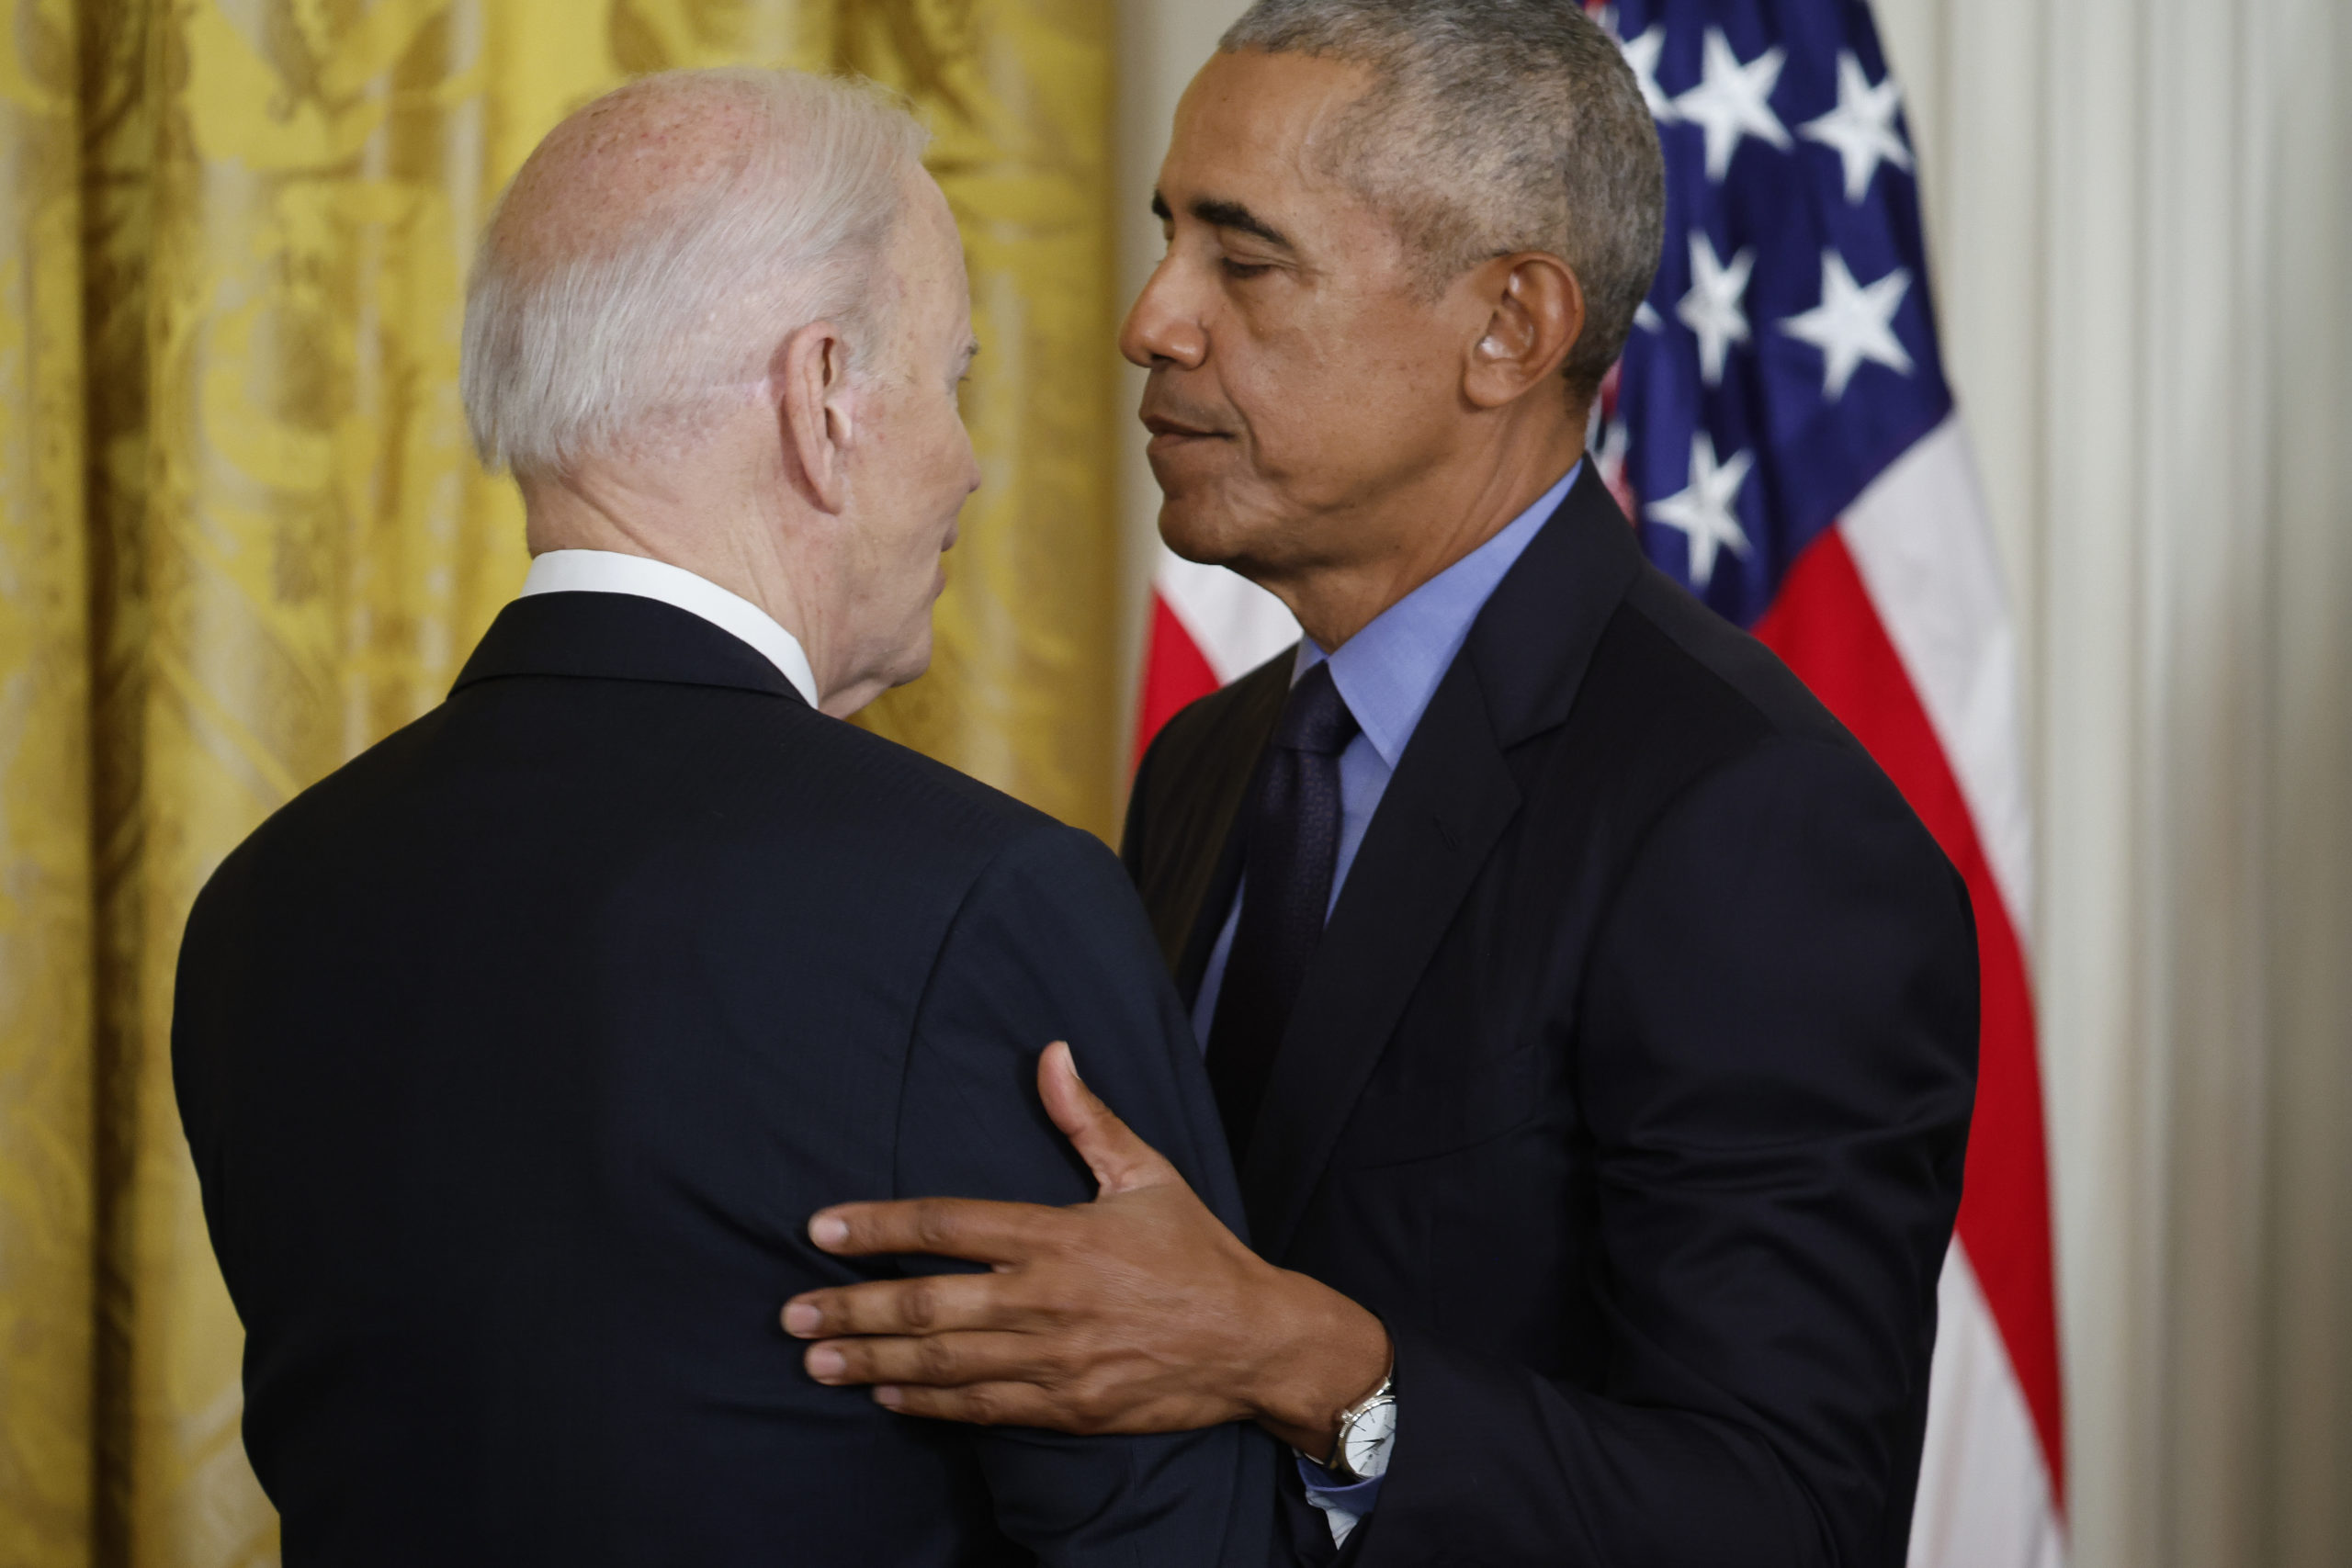 U.S. President Joe Biden and former President Barack Obama embrace during an event to mark the 2010 passage of the Affordable Care Act in the East Room of the White House on April 5, 2022 in Washington, DC. With then-Vice President Joe Biden by his side, Obama signed 'Obamacare' into law on March 23, 2010. (Photo by Chip Somodevilla/Getty Images)